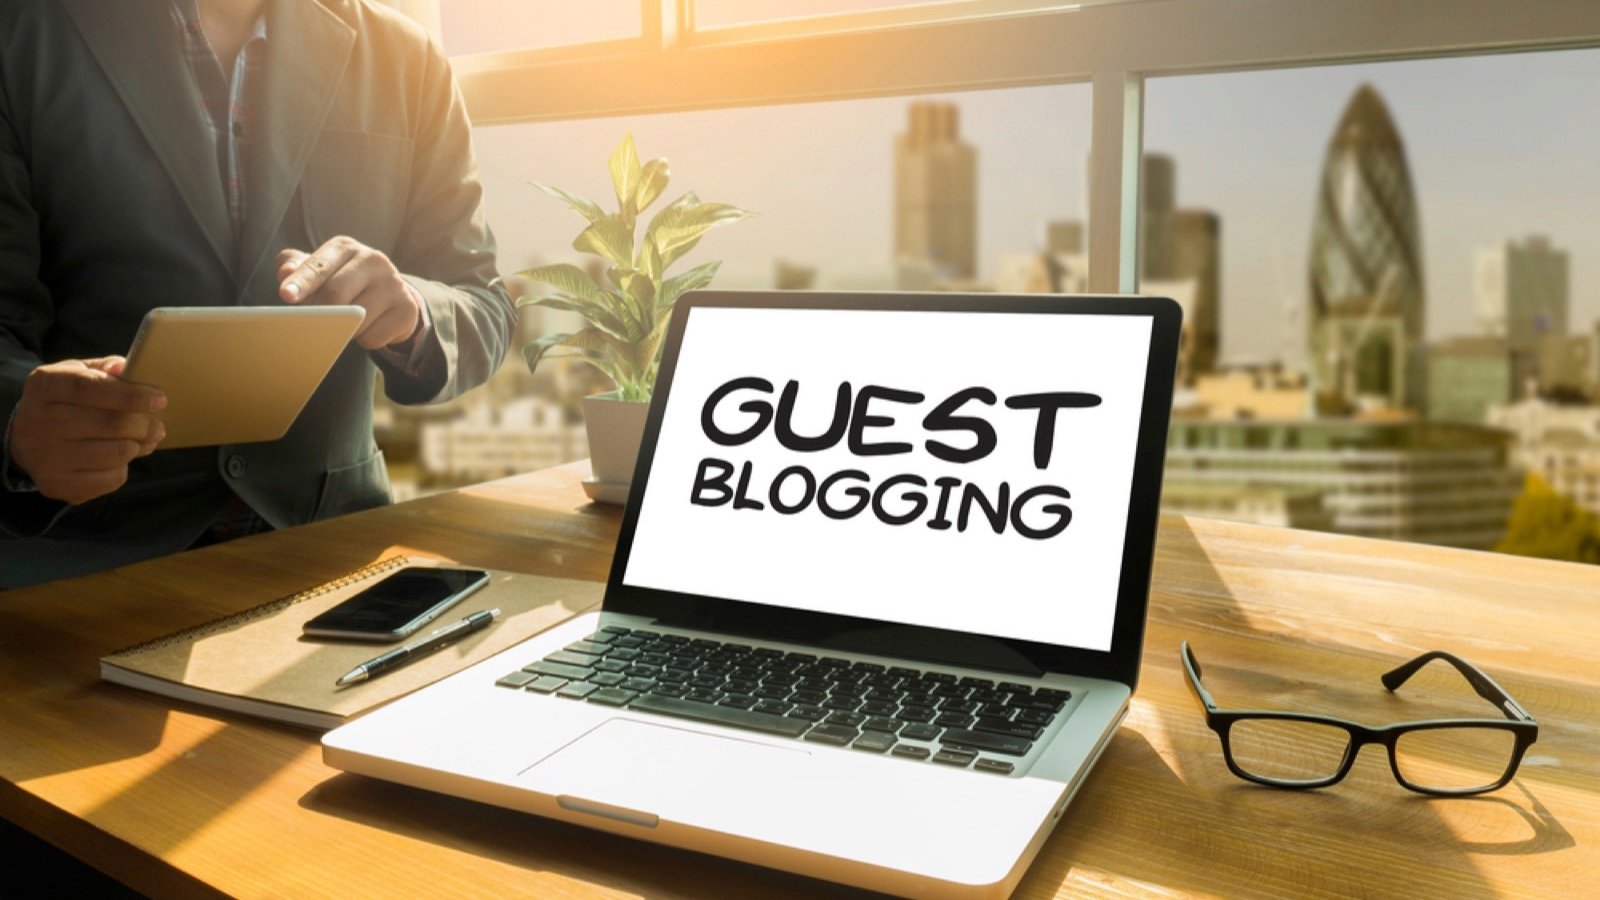 <p>Guest posting allows you to share your knowledge and perspectives with a broader audience while establishing yourself as a credible authority in your field.</p><p>To get started, identify websites and blogs that cater to your target audience and are relevant to your industry or niche. Research their guest posting guidelines and submission process. Afterward, pitch them your ideas for potential topics or articles.</p>